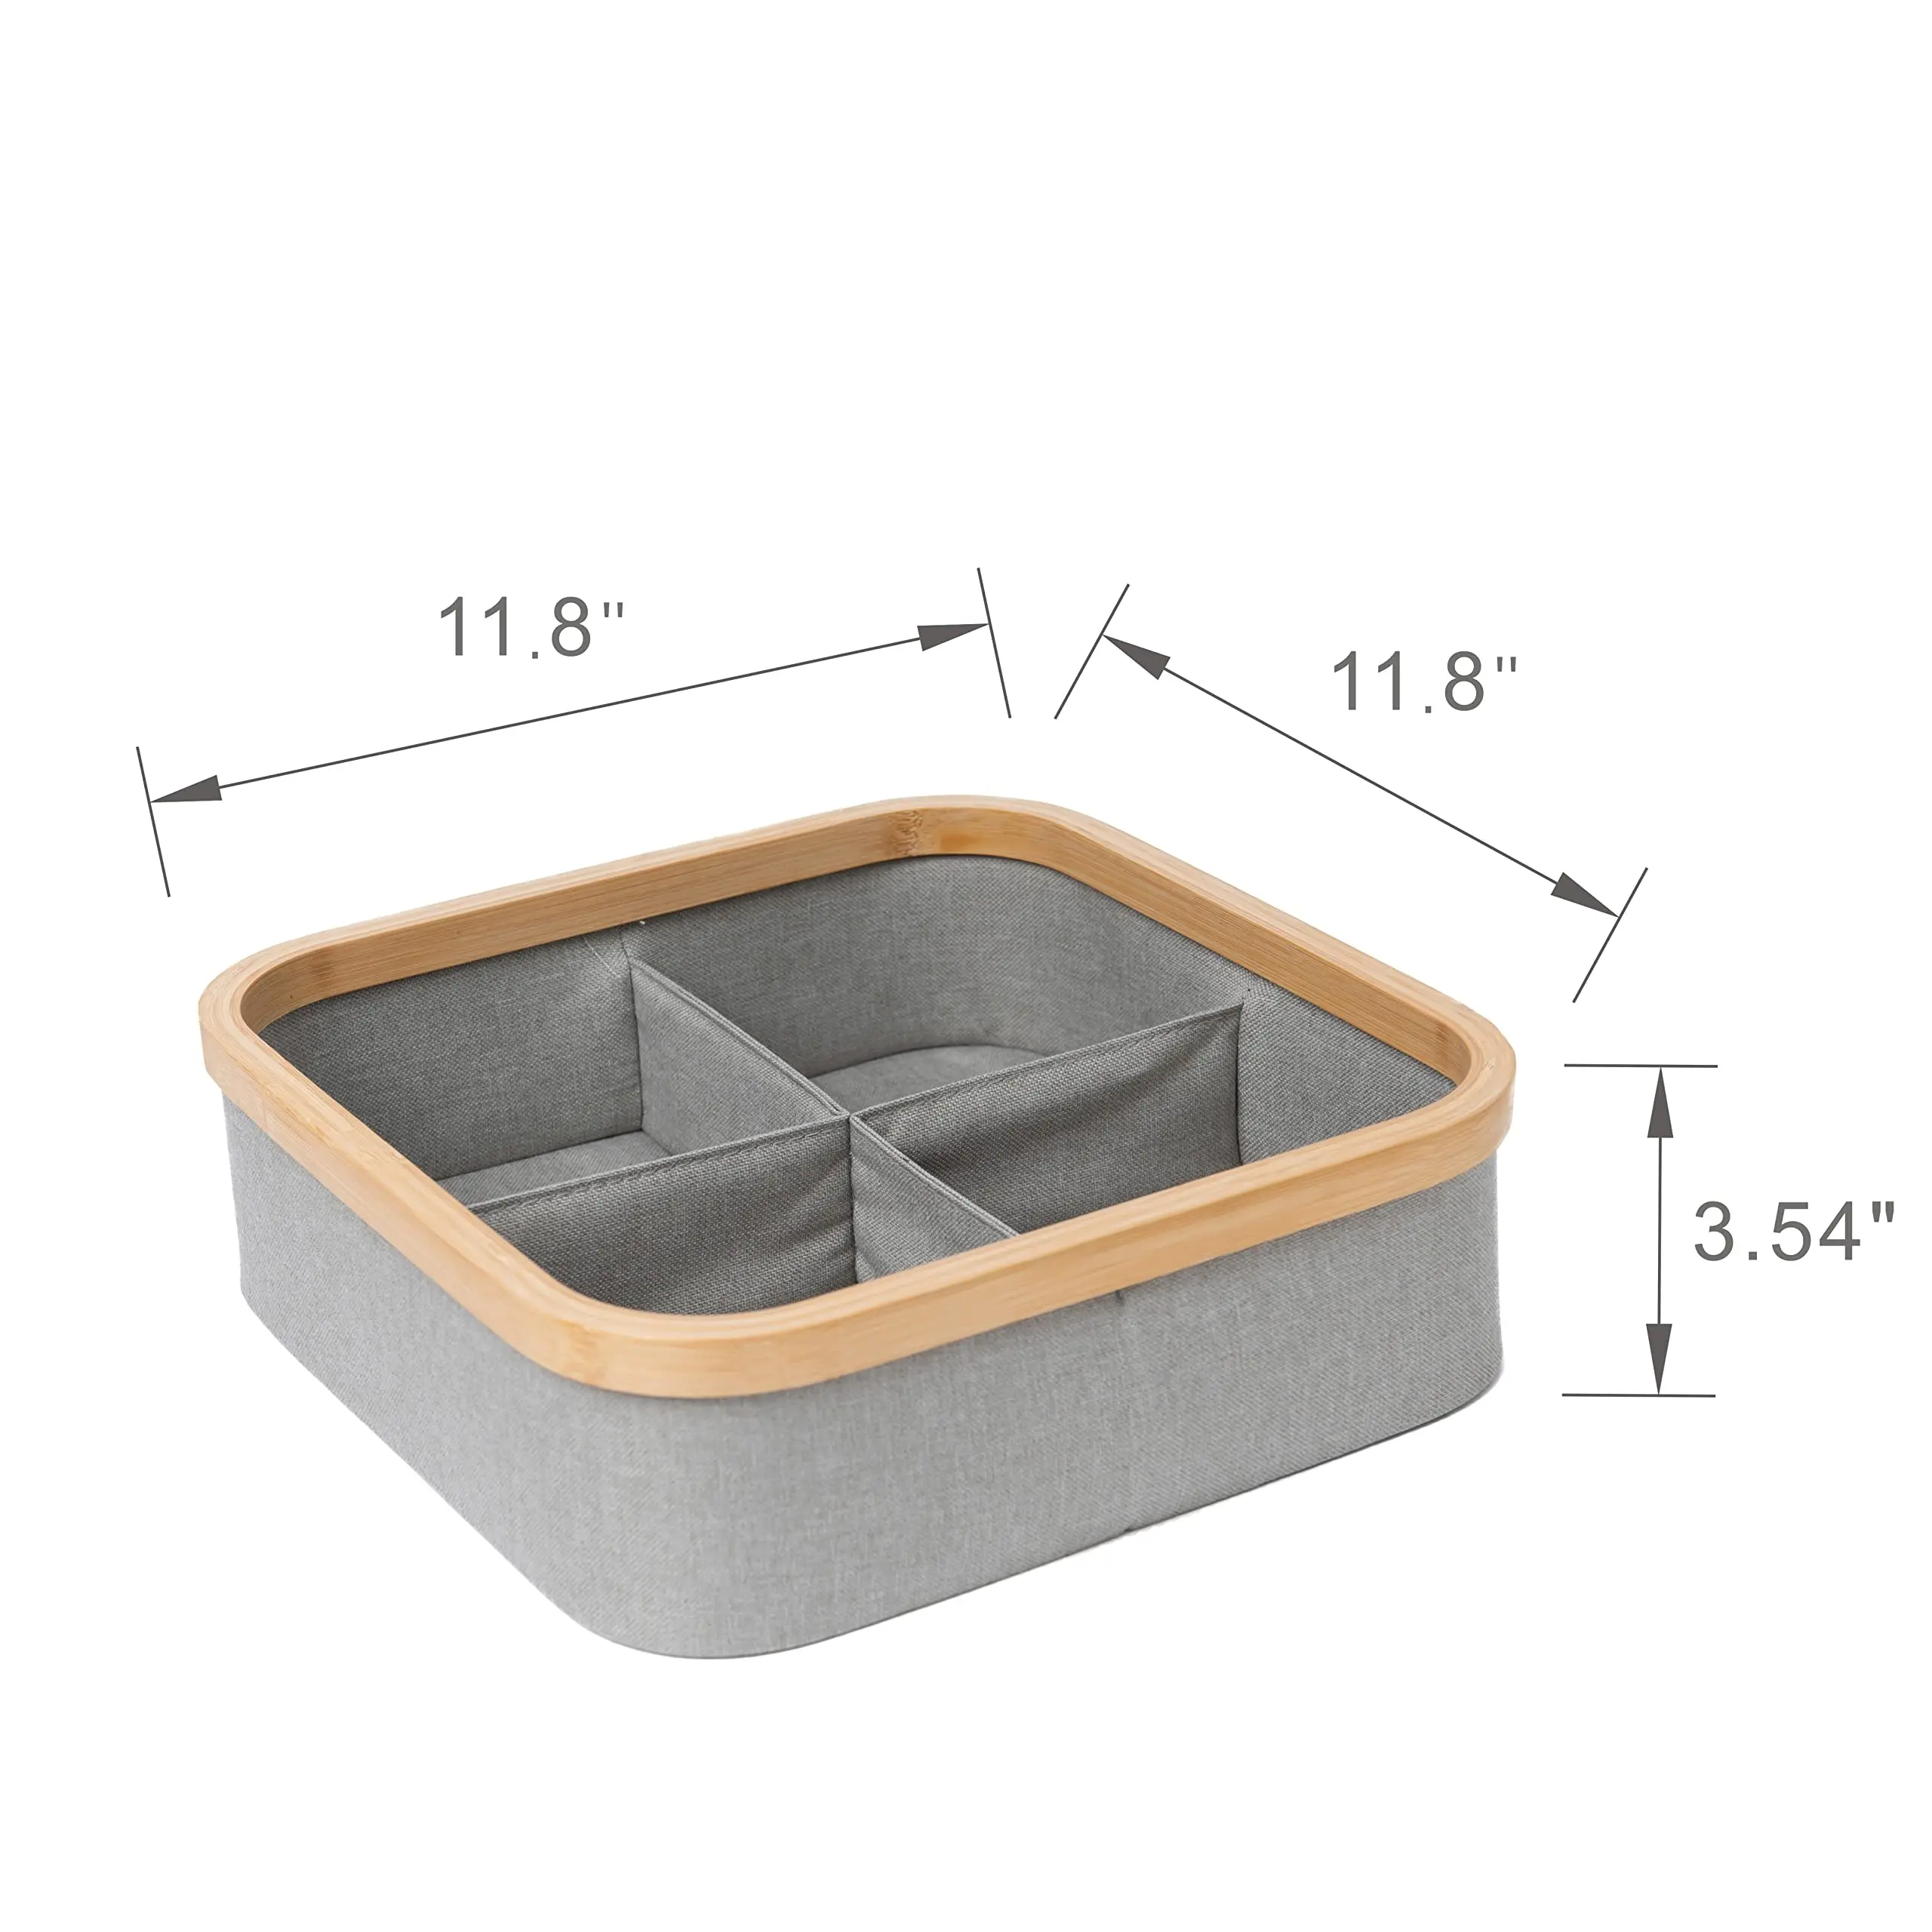 Bamboo Organizer Boxes - Multi-use Storage Bins for Towels, Socks under wares in Bath Room - 9 Divider